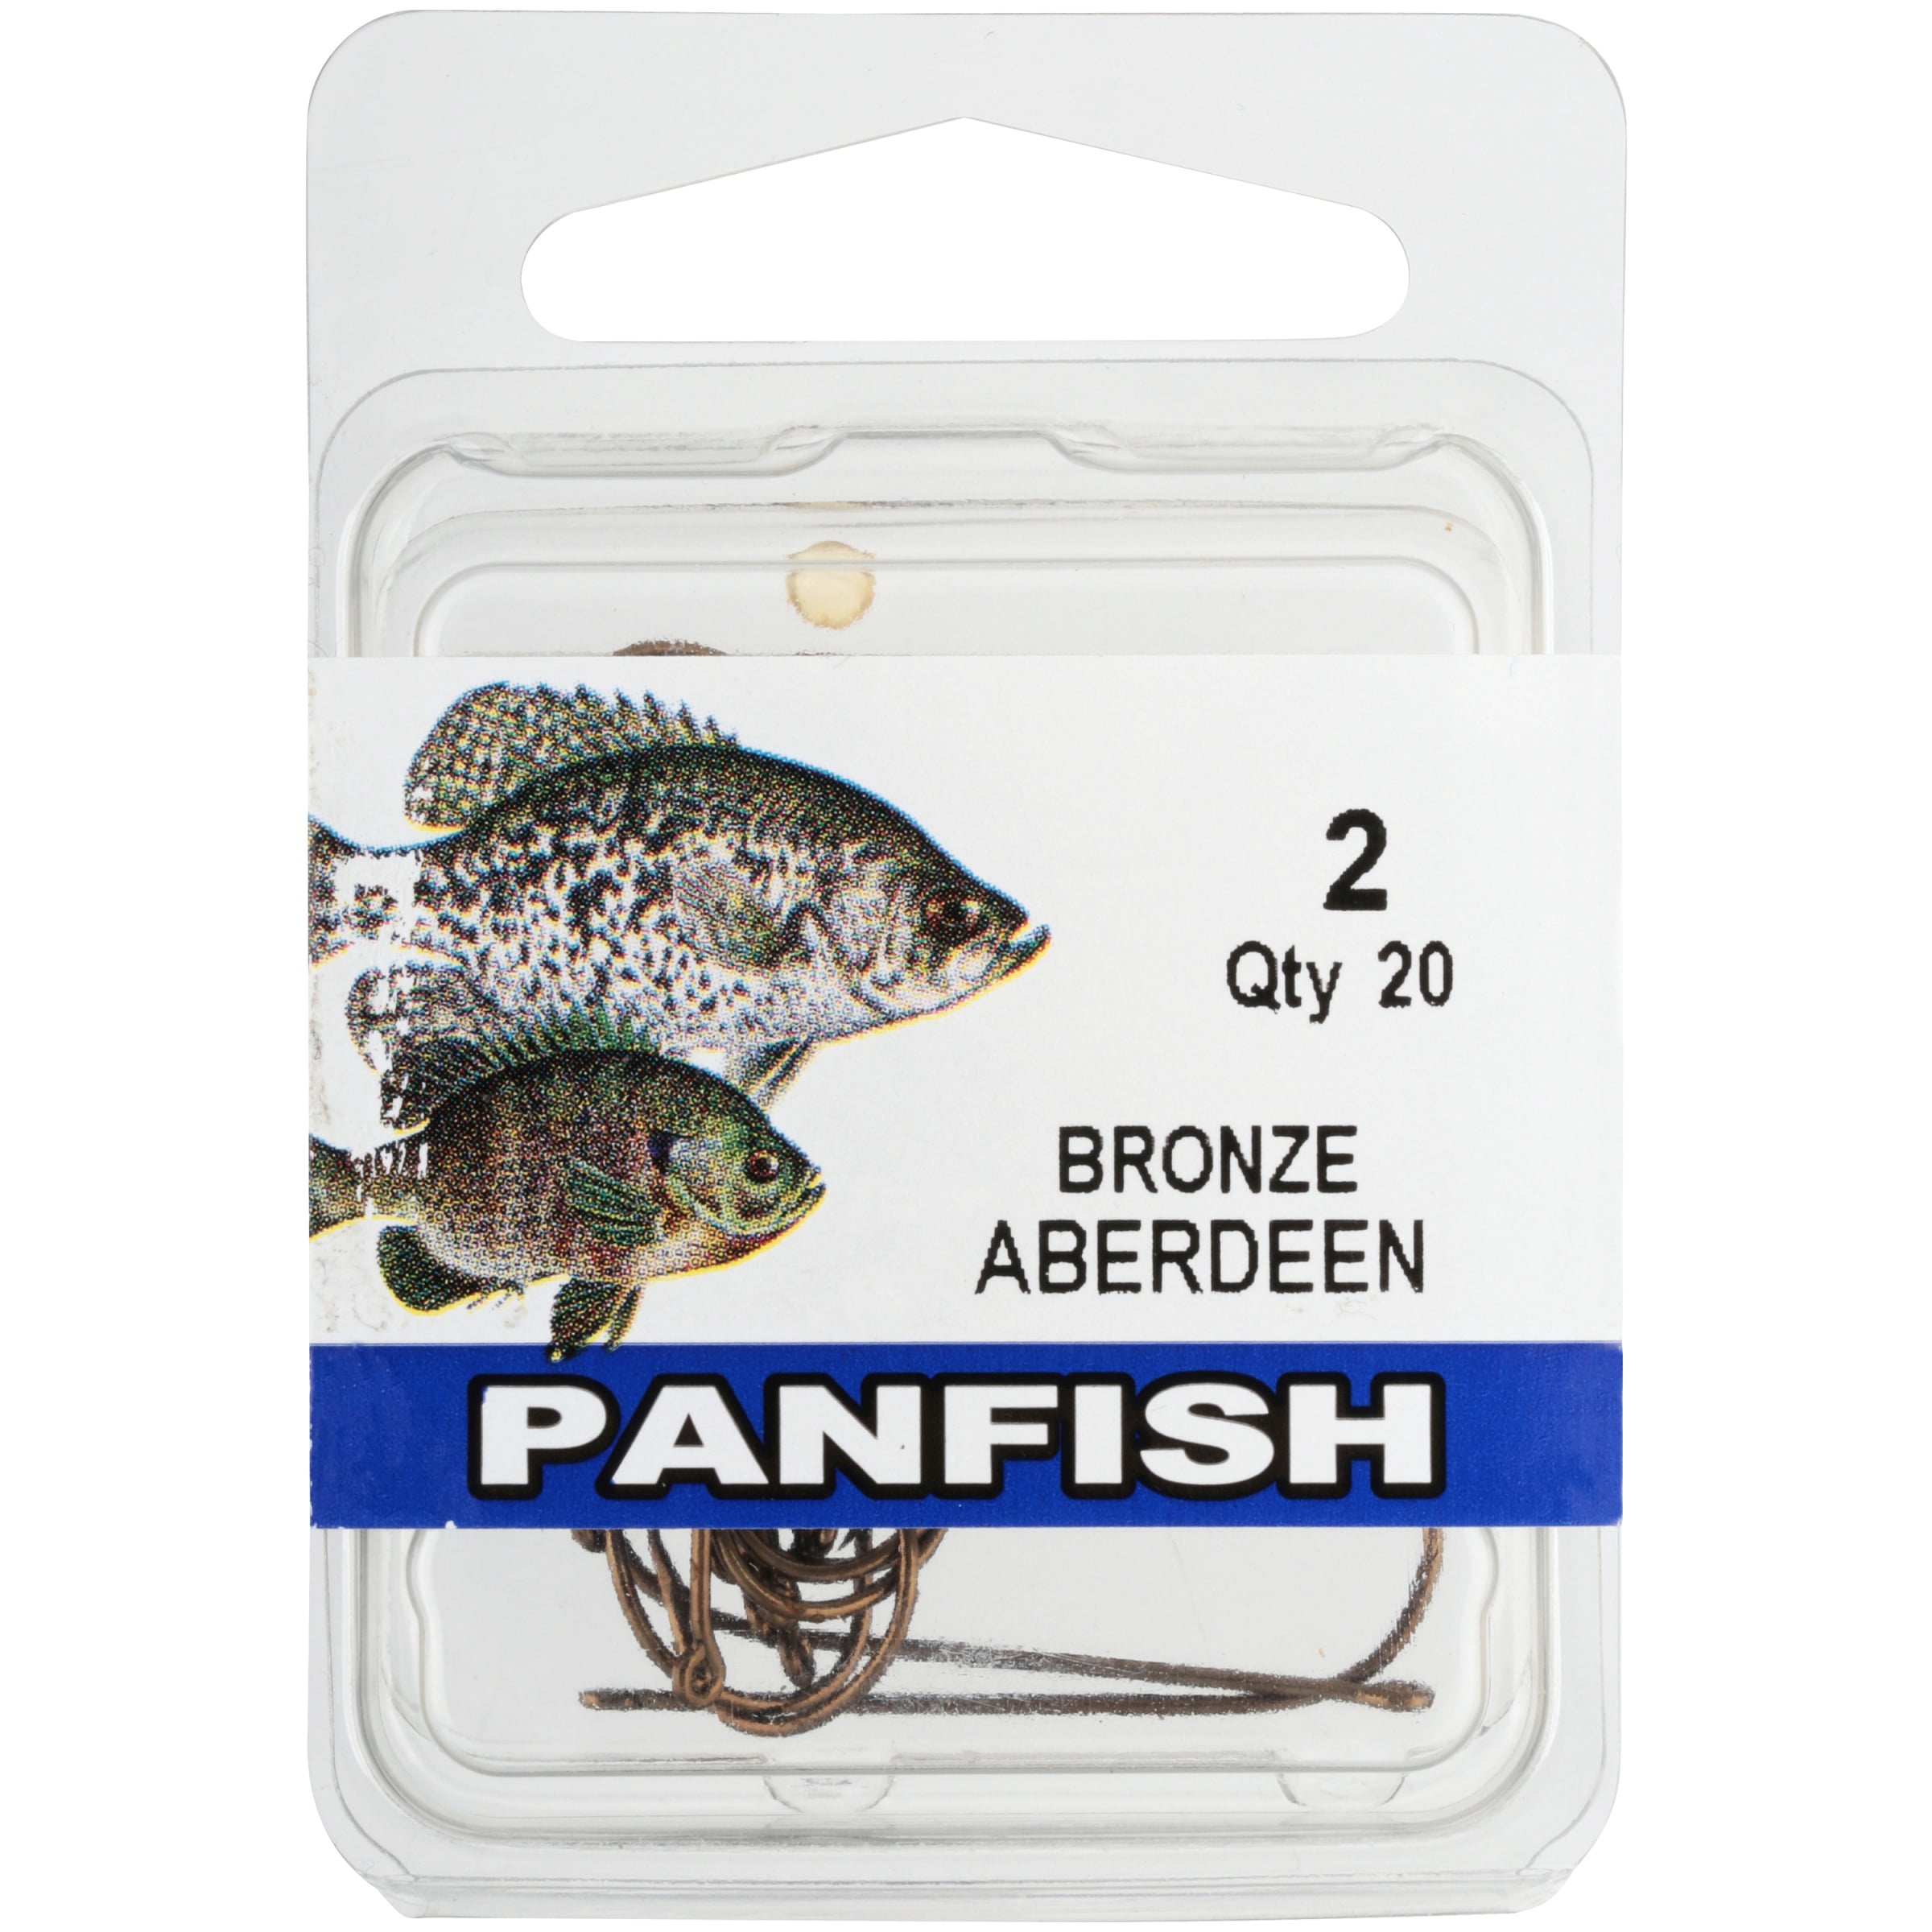 Details about   Eagle Claw Panfish Bronze Aberdeen 1XLS Fishing Hook RLAB-4 size 4 20/pack